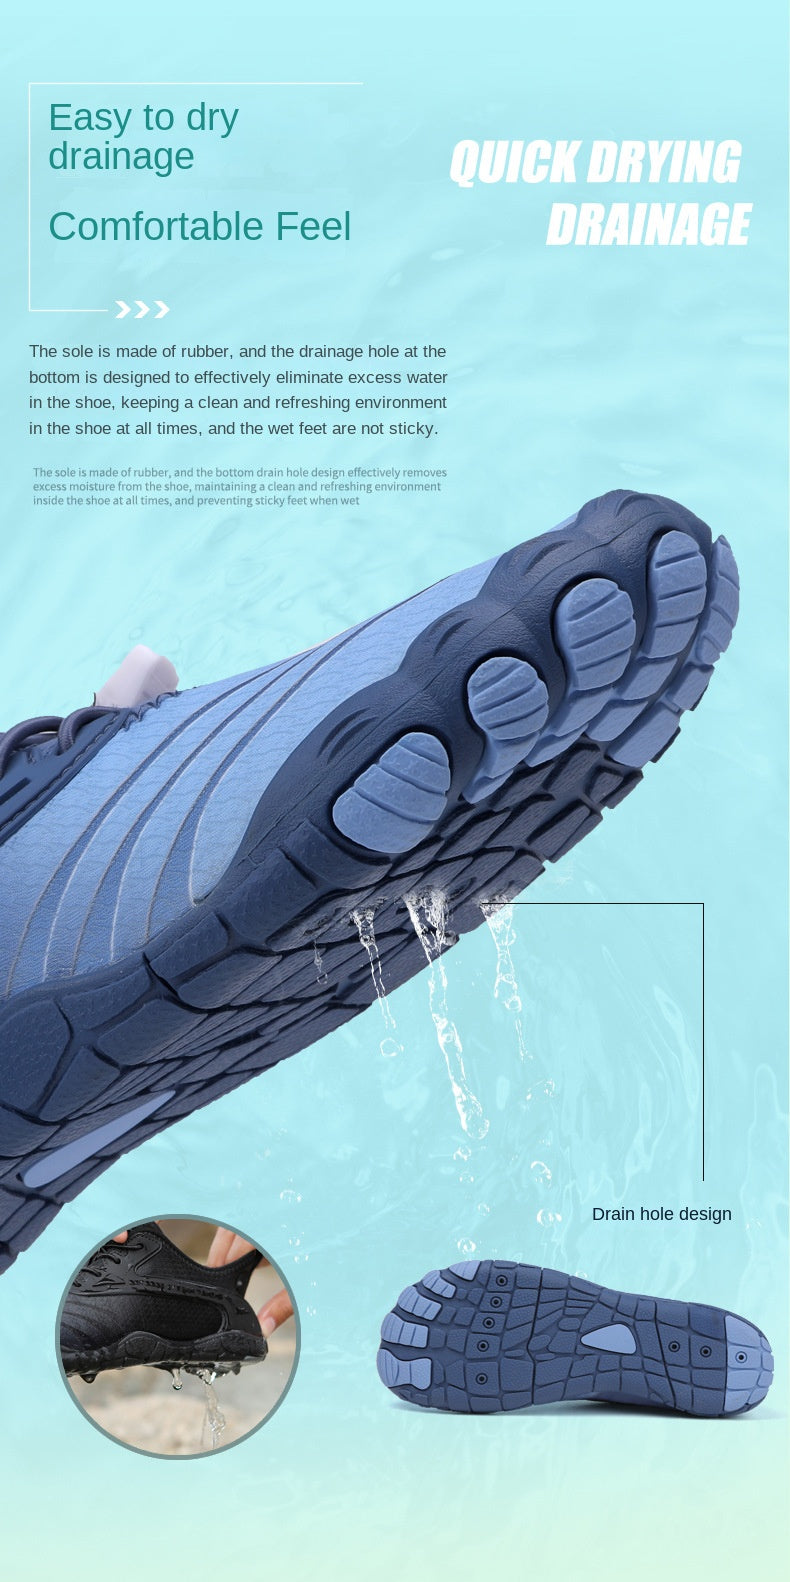 Lightweight Amphibious Shoes for Fishing and Hiking - Betatton - water shoes